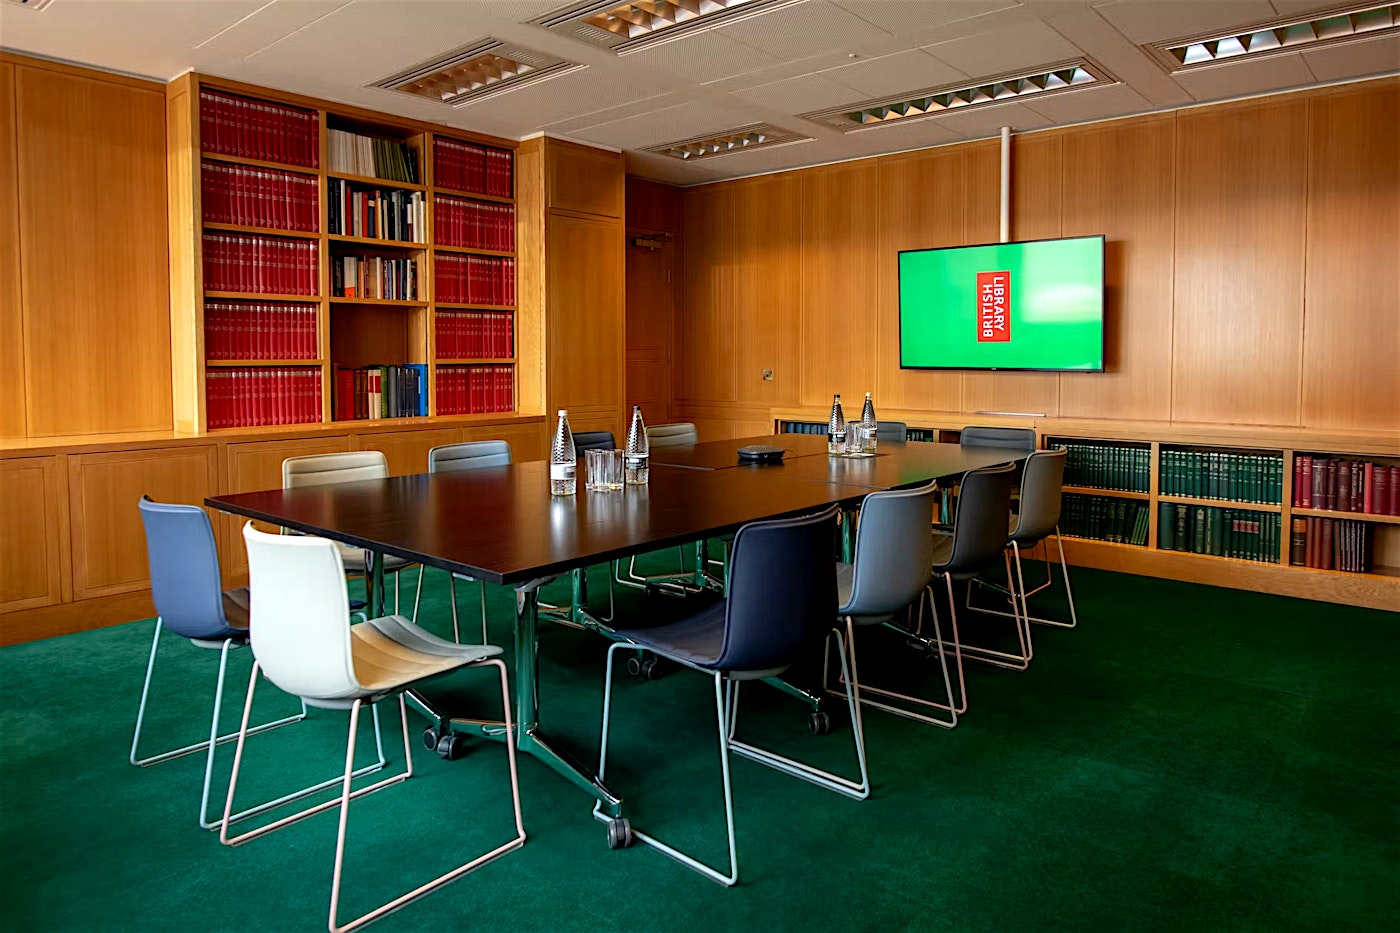 A room for meeting in at the British Library in London, England